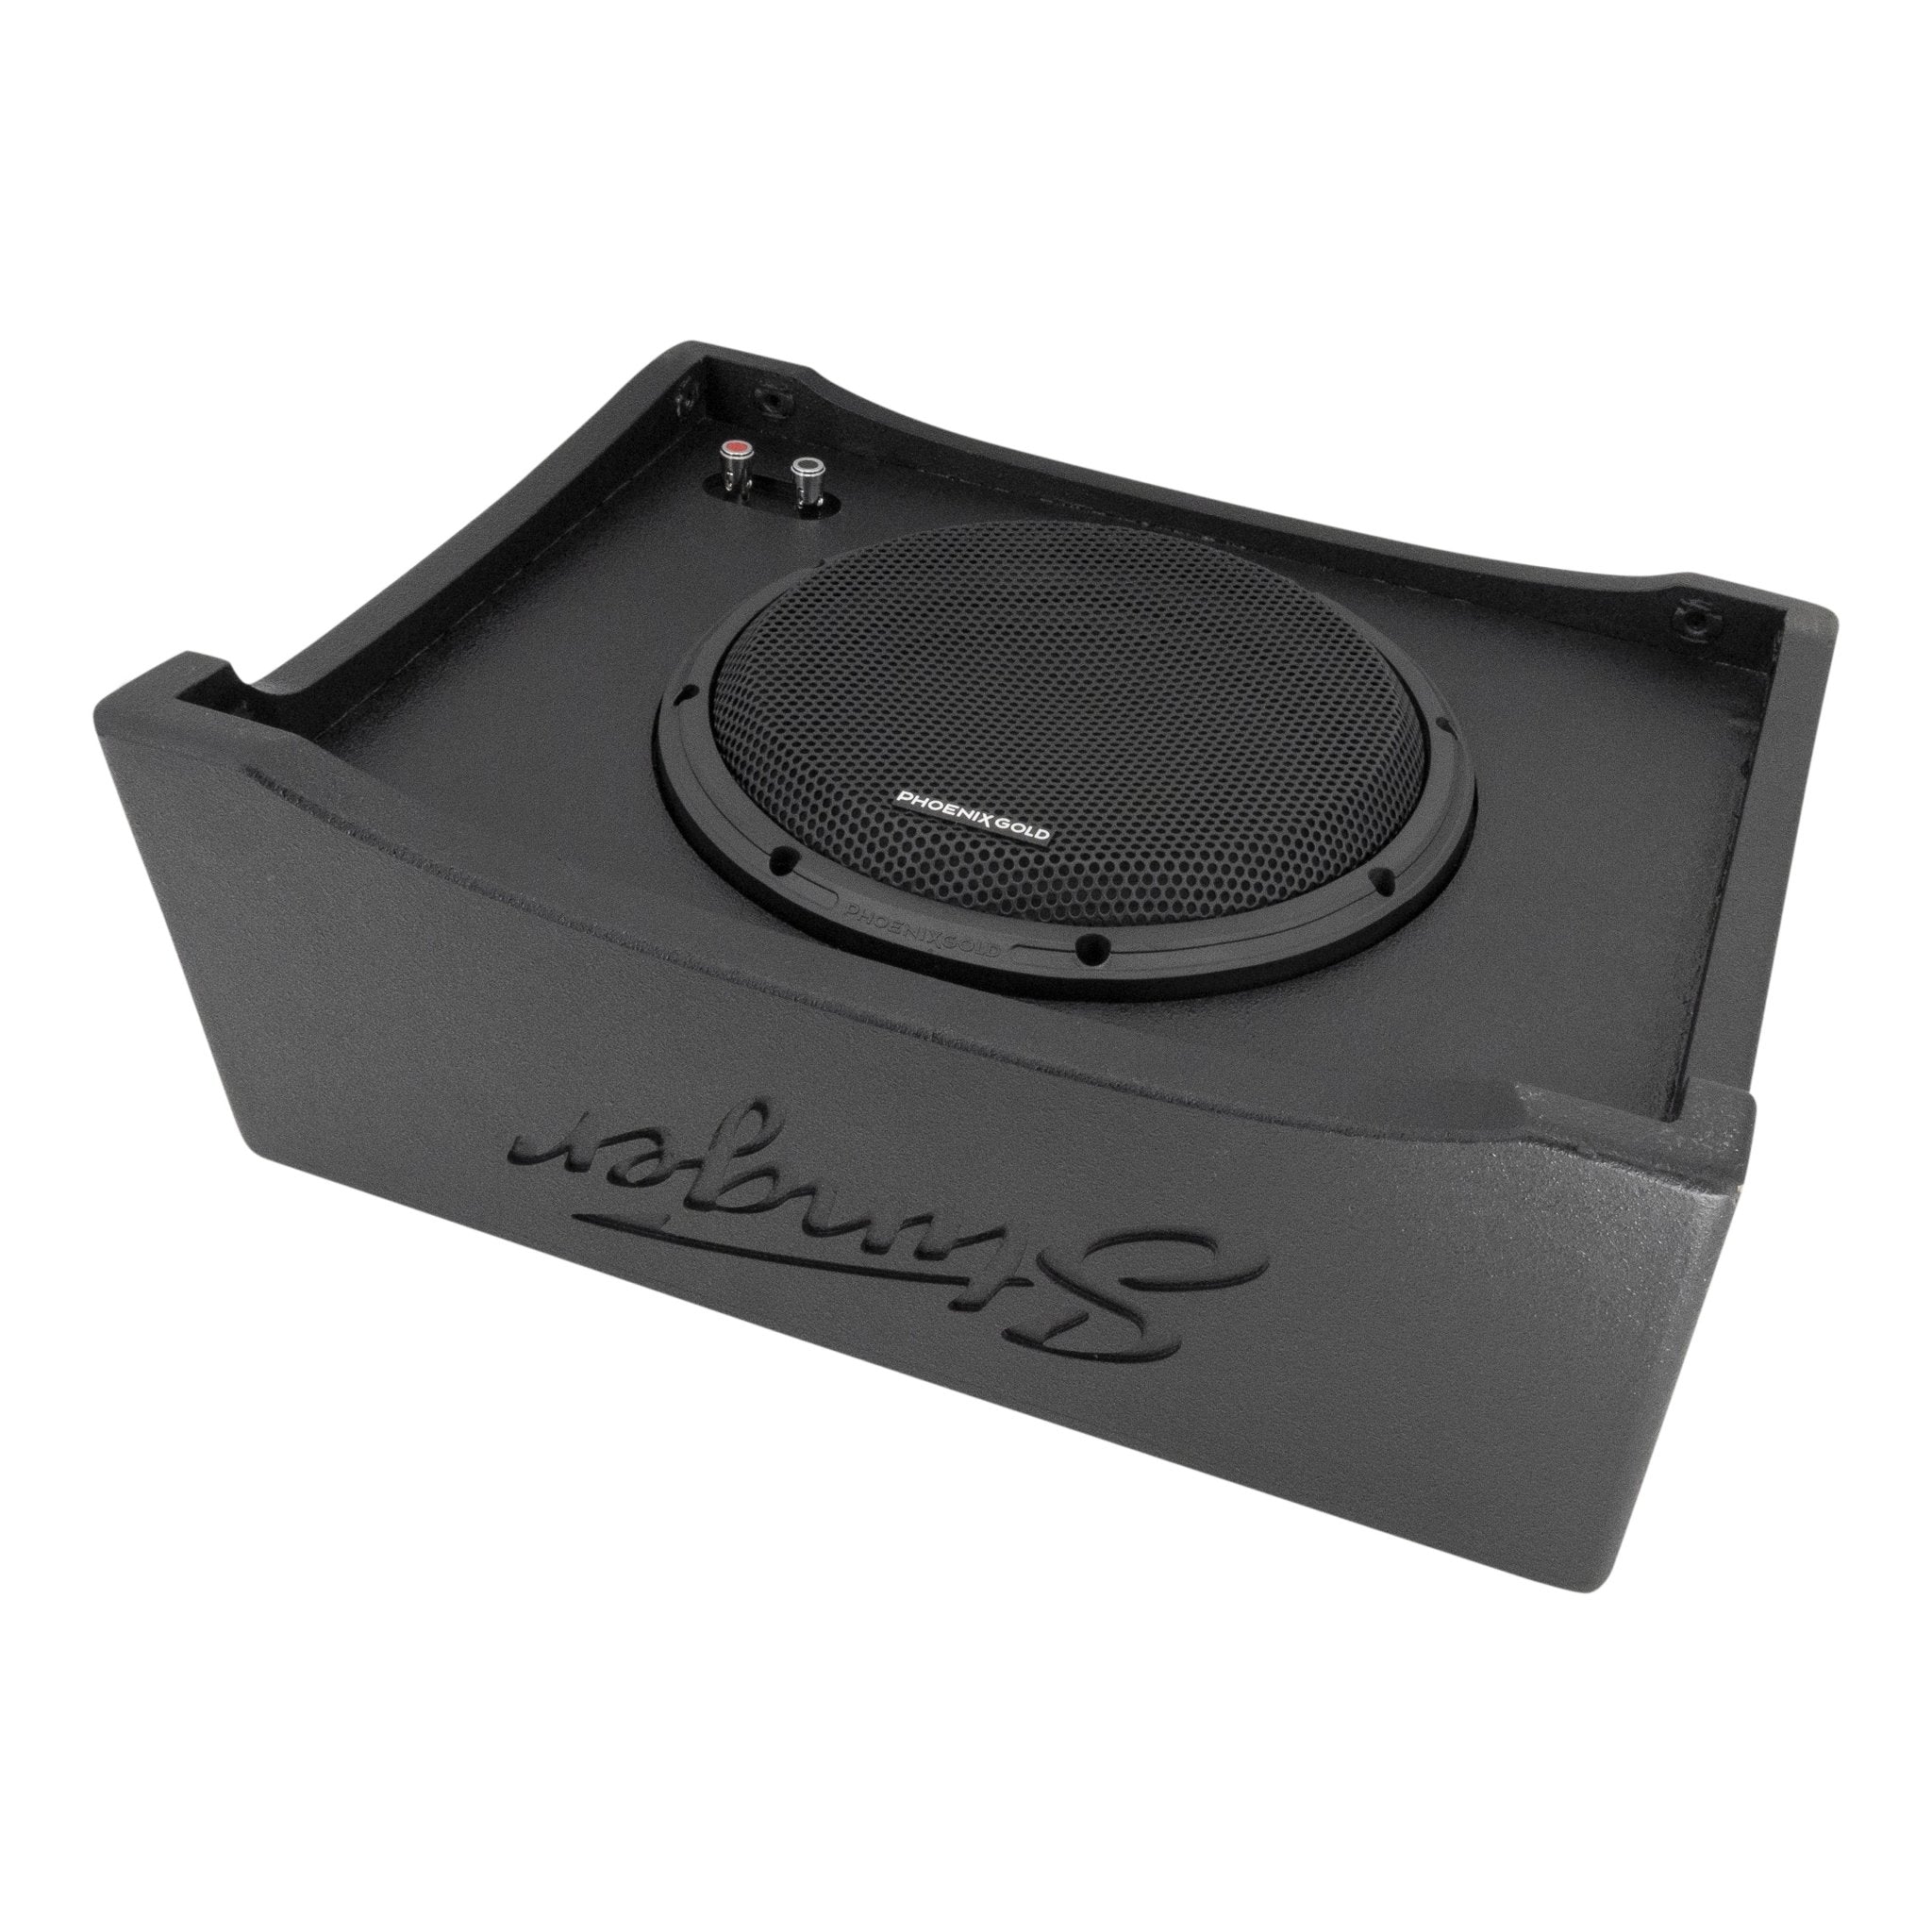 10" 400 Watt (RMS) Under-Seat Loaded Ported Subwoofer Enclosure Bass Package for Chevy Silverado/GMC Sierra Trucks (2007-2020)